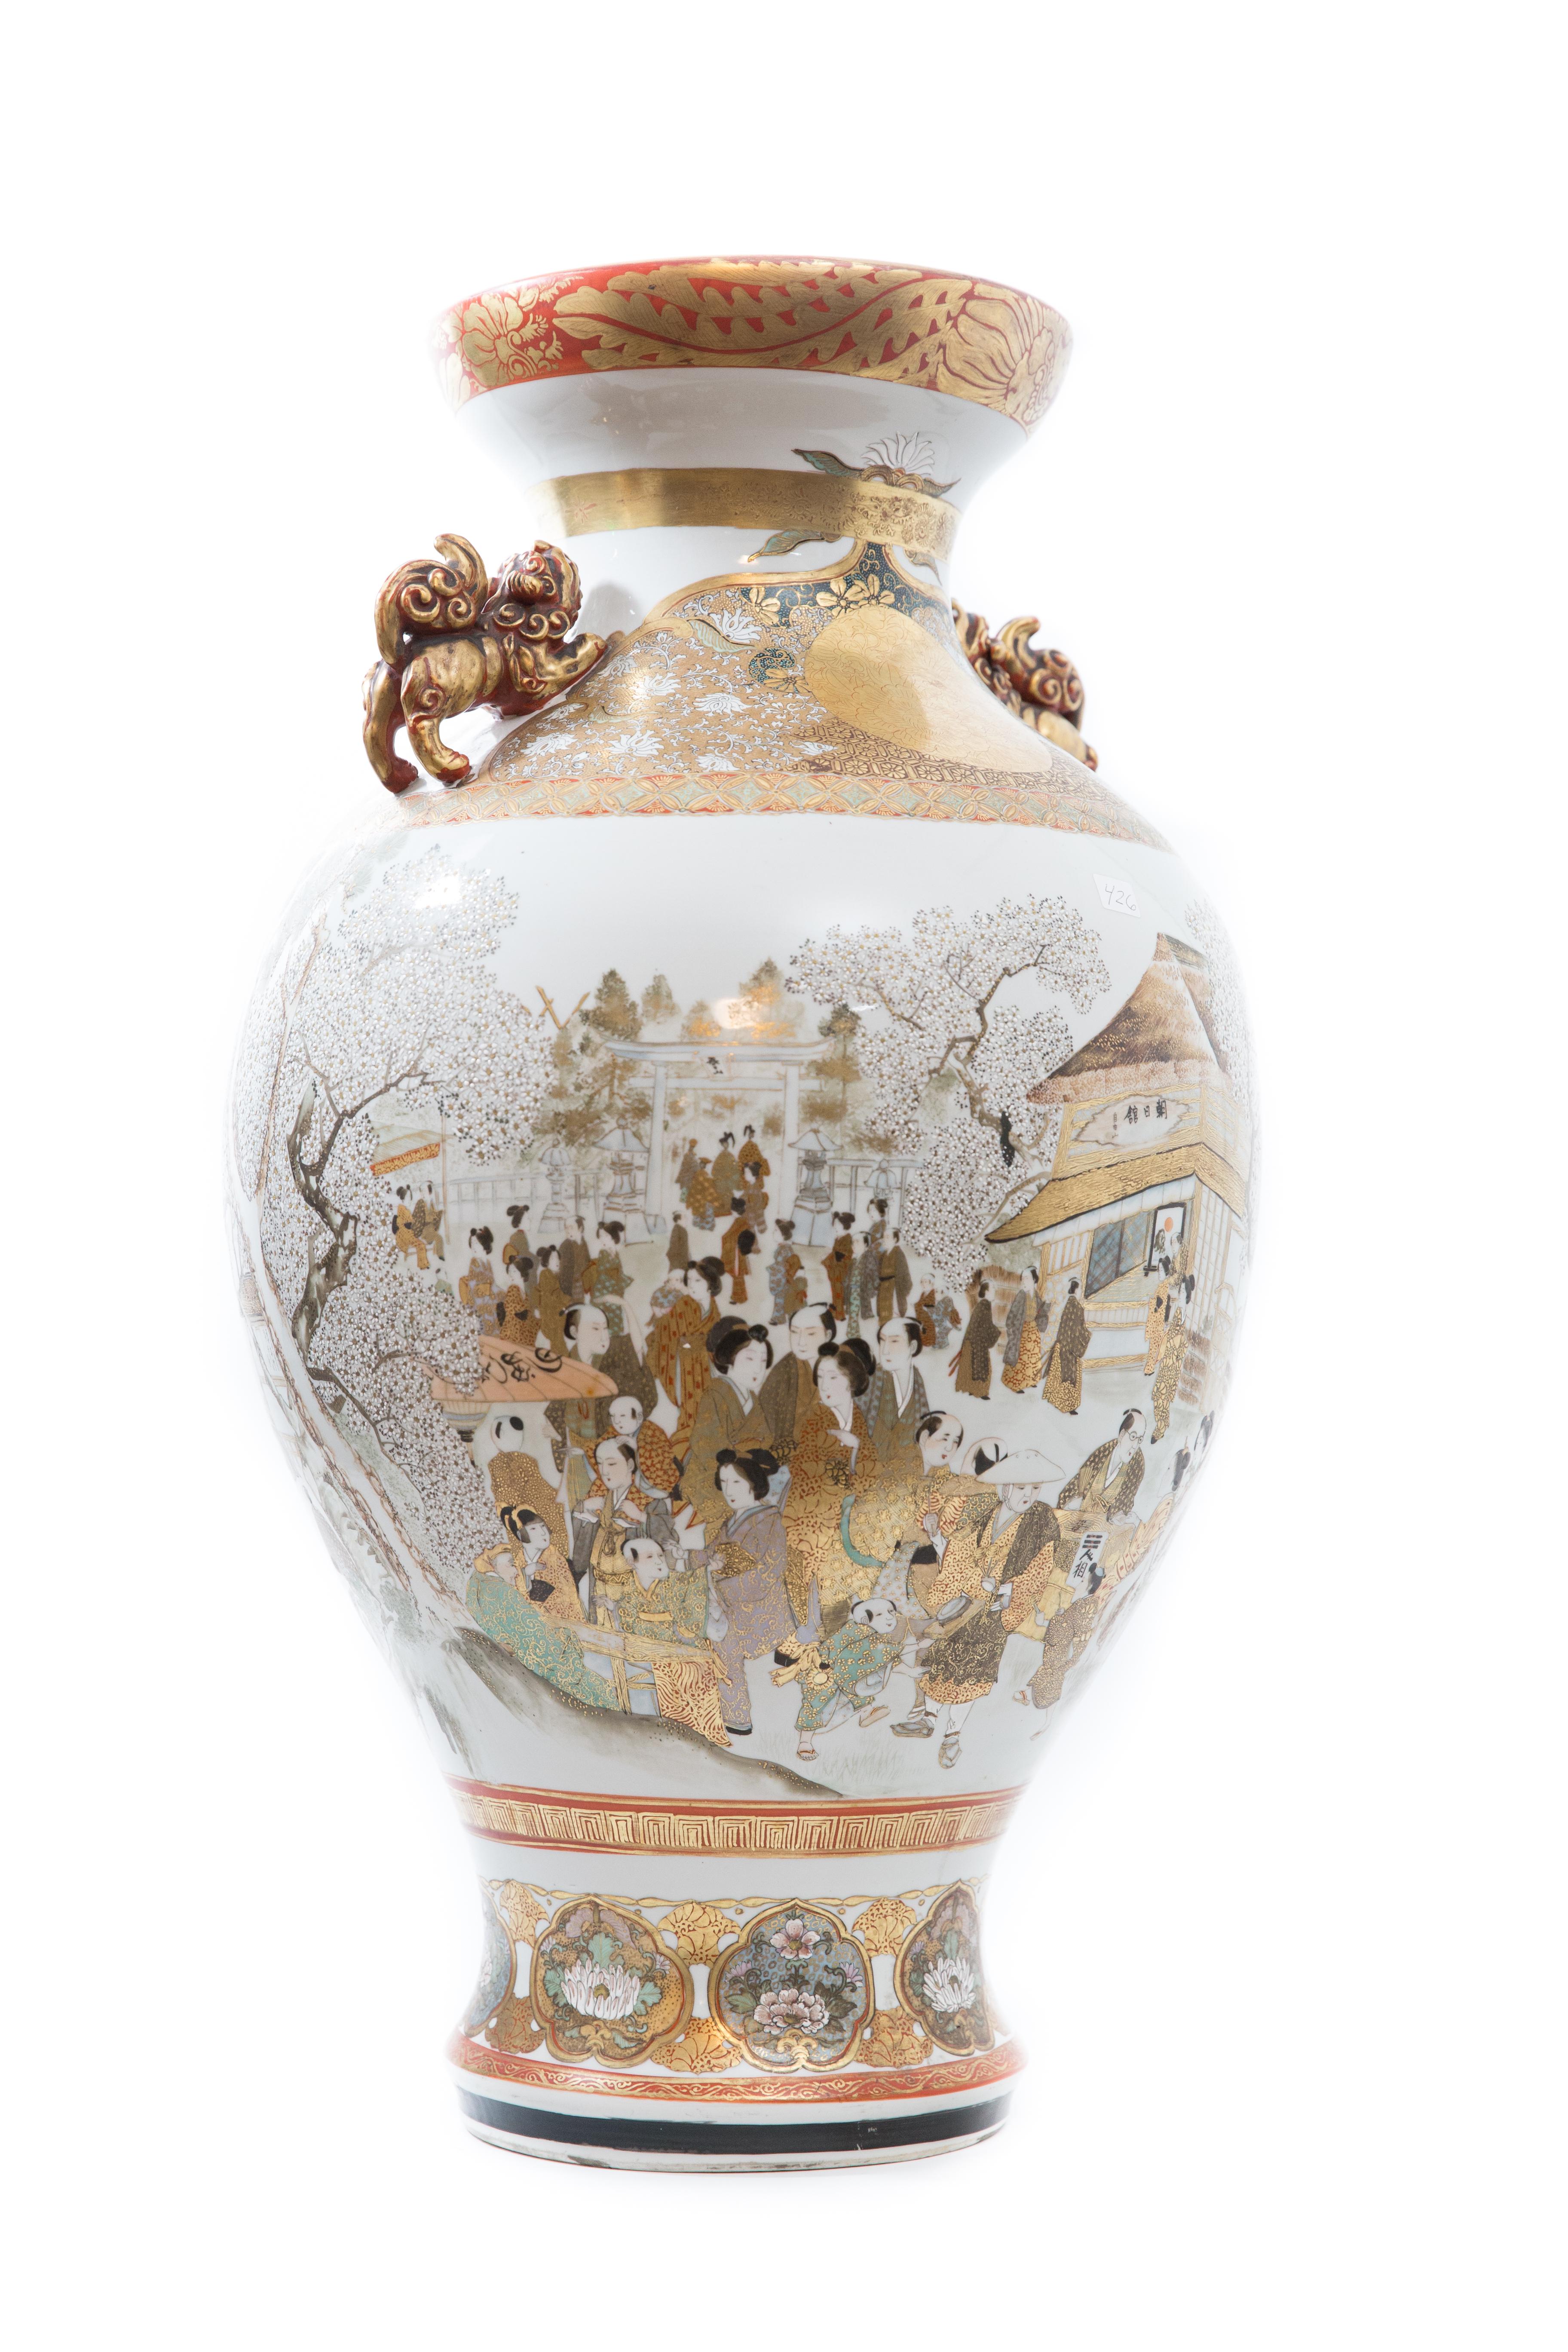 Offered is a Meiji period Japanese Kutani/Satsuma porcelain vase. This vase stands about 30”in height and exhibits exceptionally fine handpainting and enamel techniques. The vase depicts noble processions and the cherry blossum festival activities